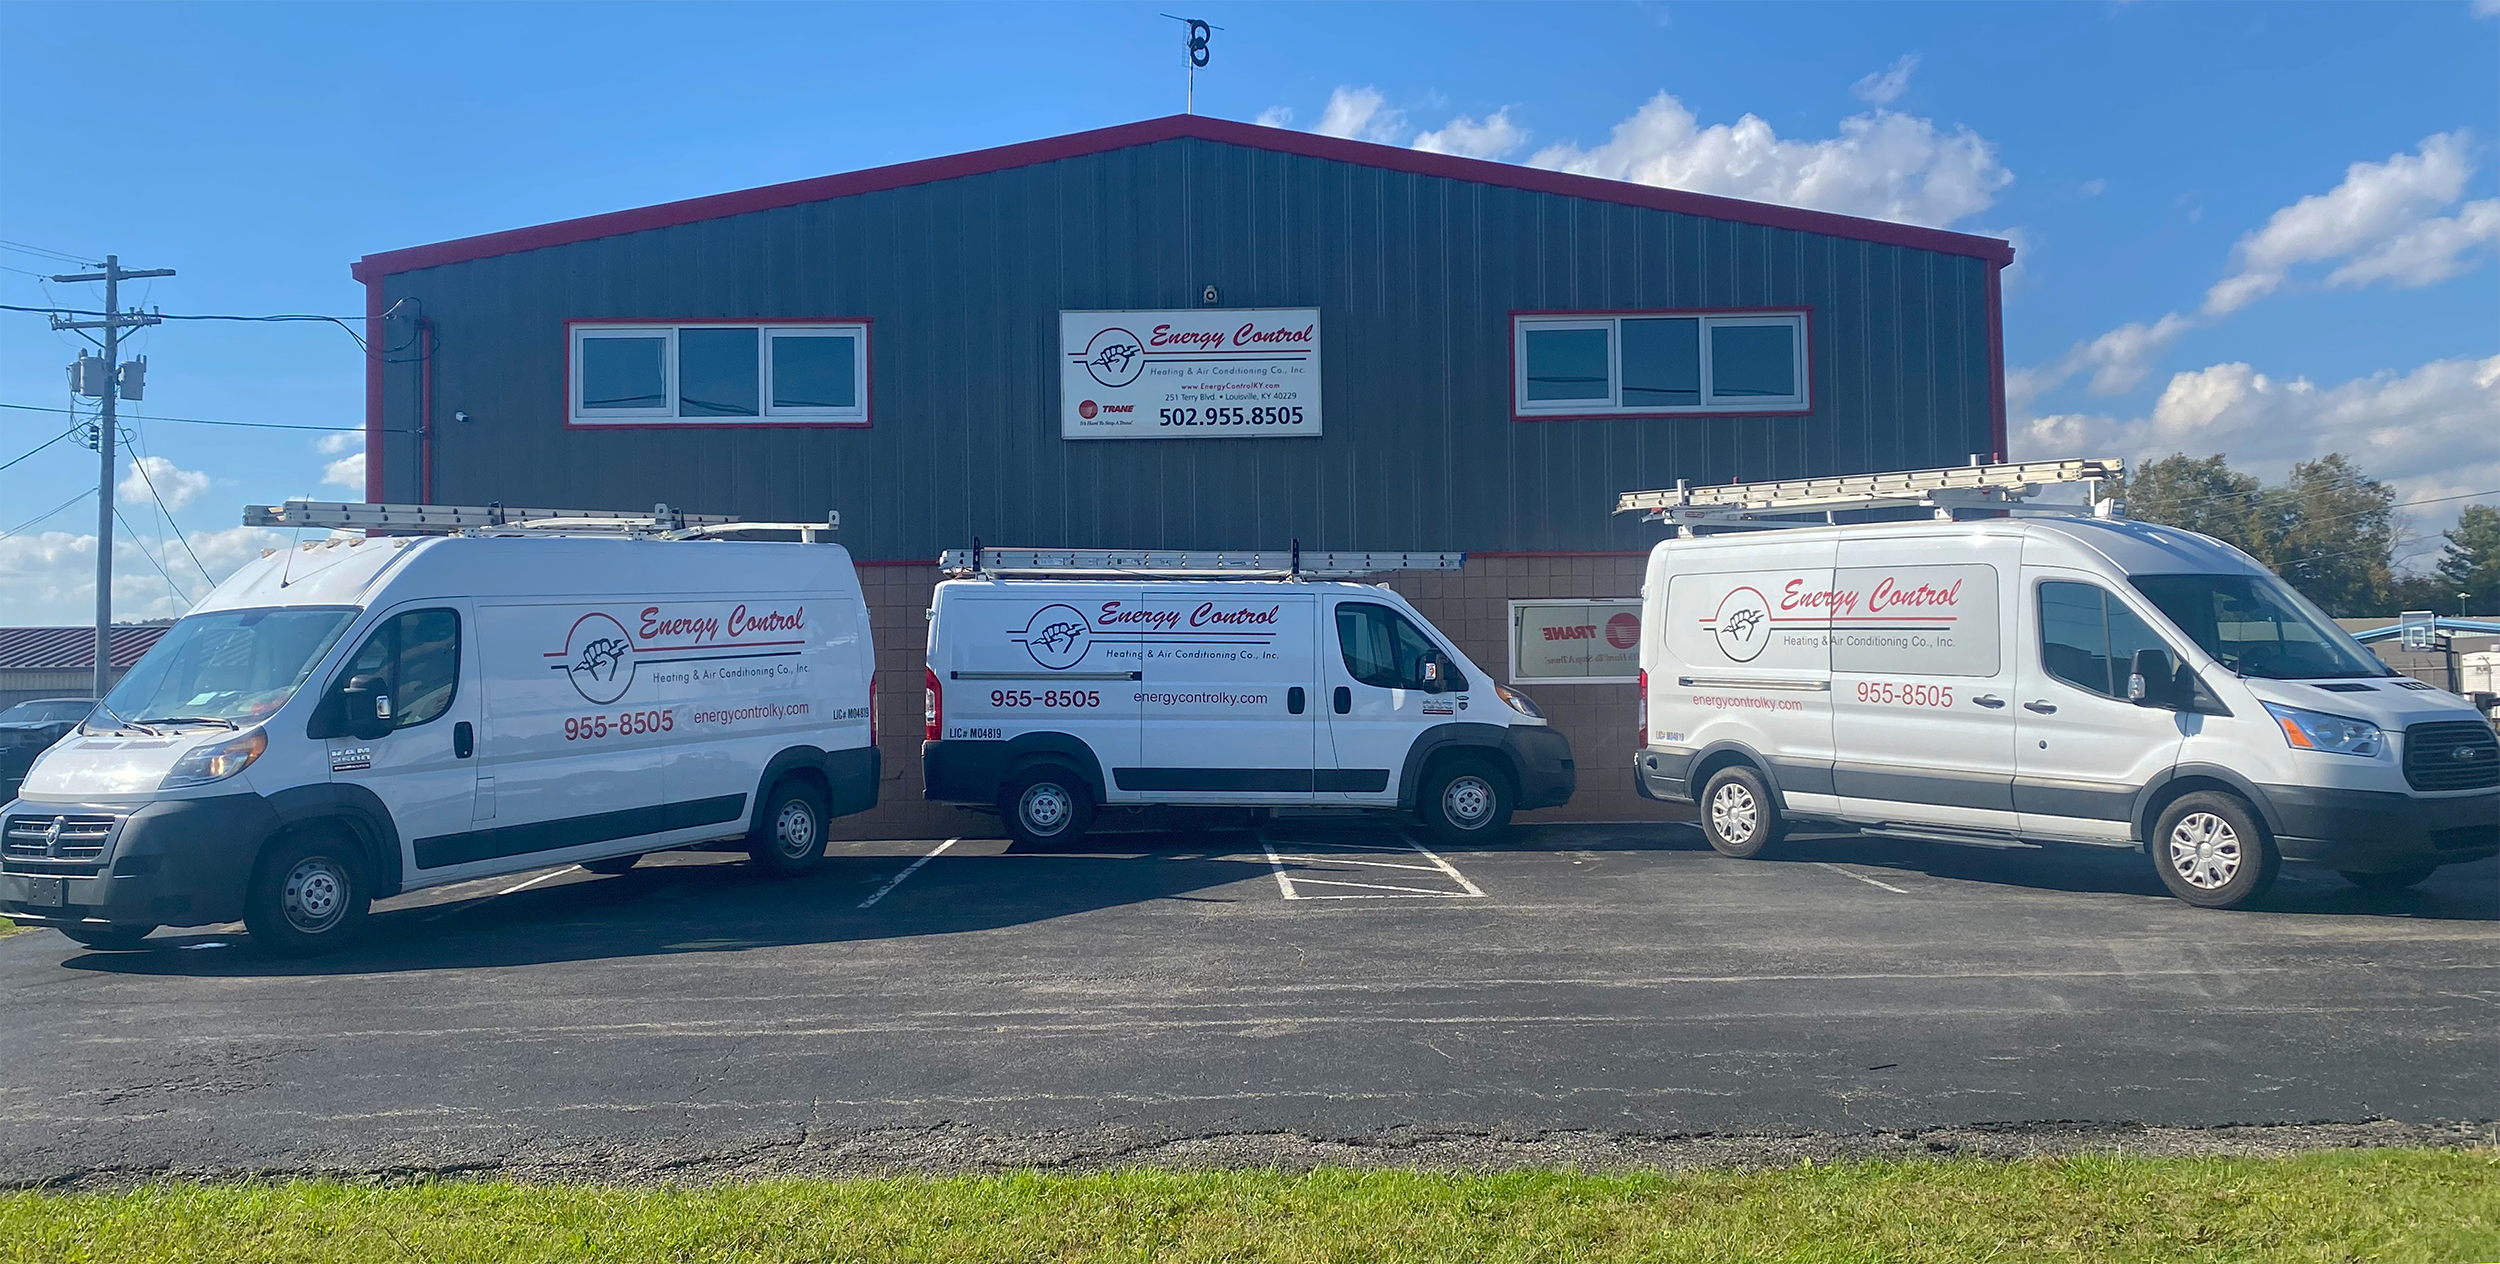 The business office of Energy Control Heating & Air conditioning with three service vans sitting in front of the building.